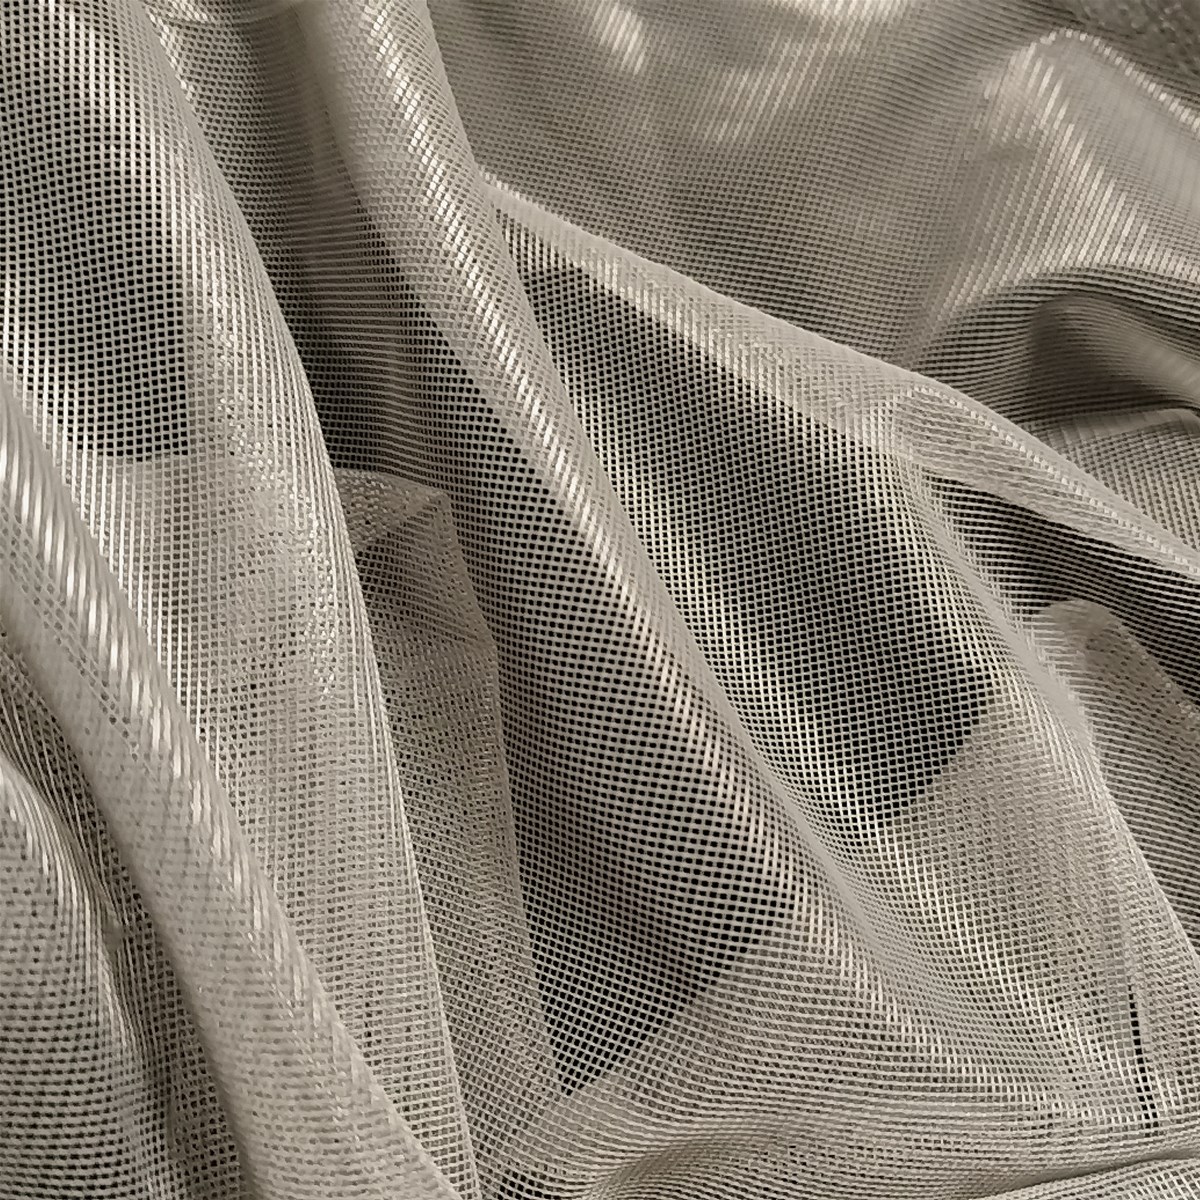 holographic projection screen mesh fabric